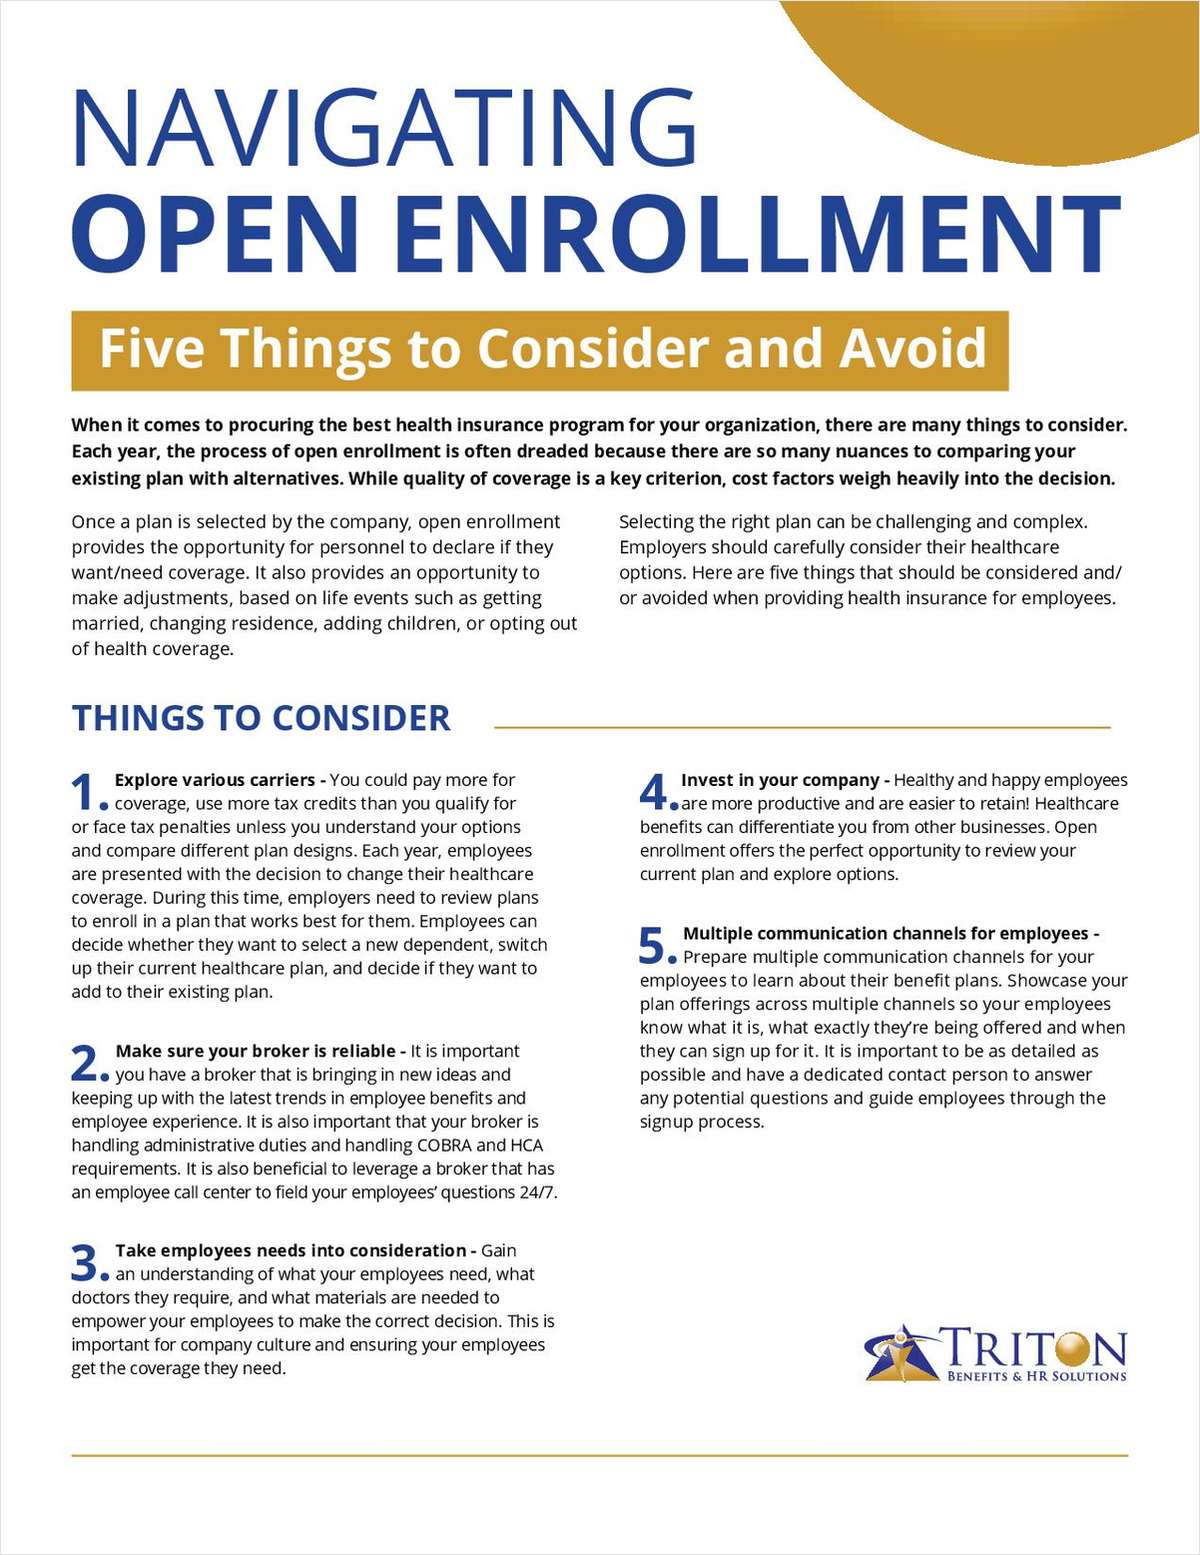 Navigating Open Enrollment: Five Things to Consider and Avoid